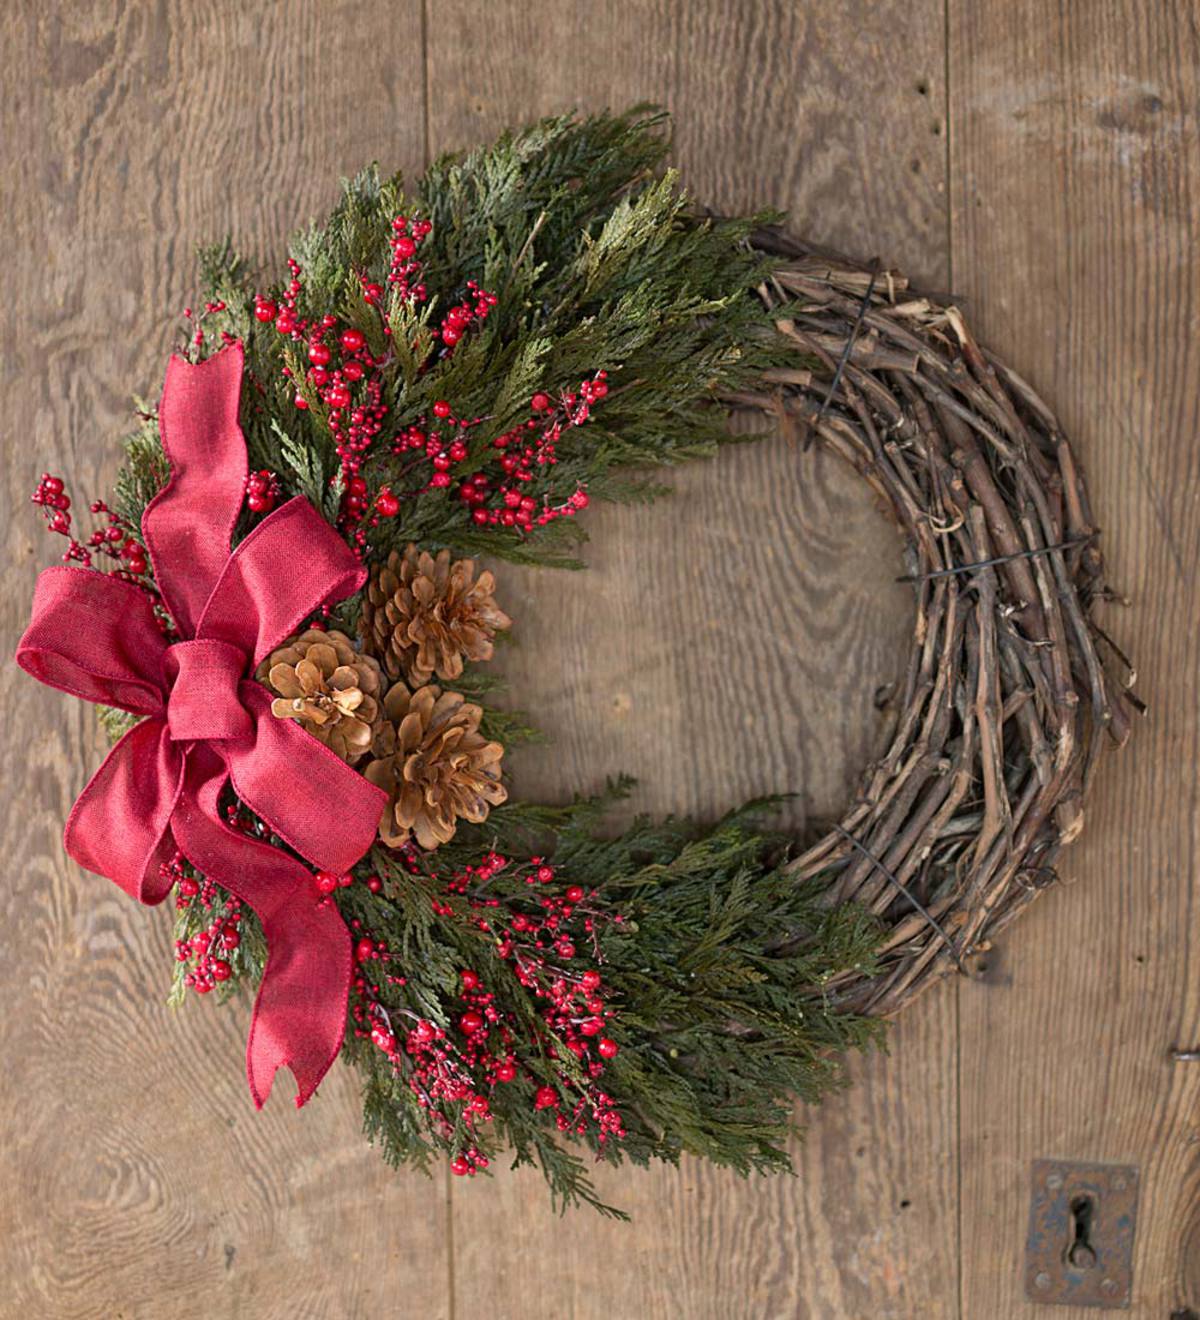 Rectangular Vine Christmas Wreath with Pine Branches and Pine Cones; Red Green Gold Winter Holiday Wreath; Christmas Grapevine Door Decor